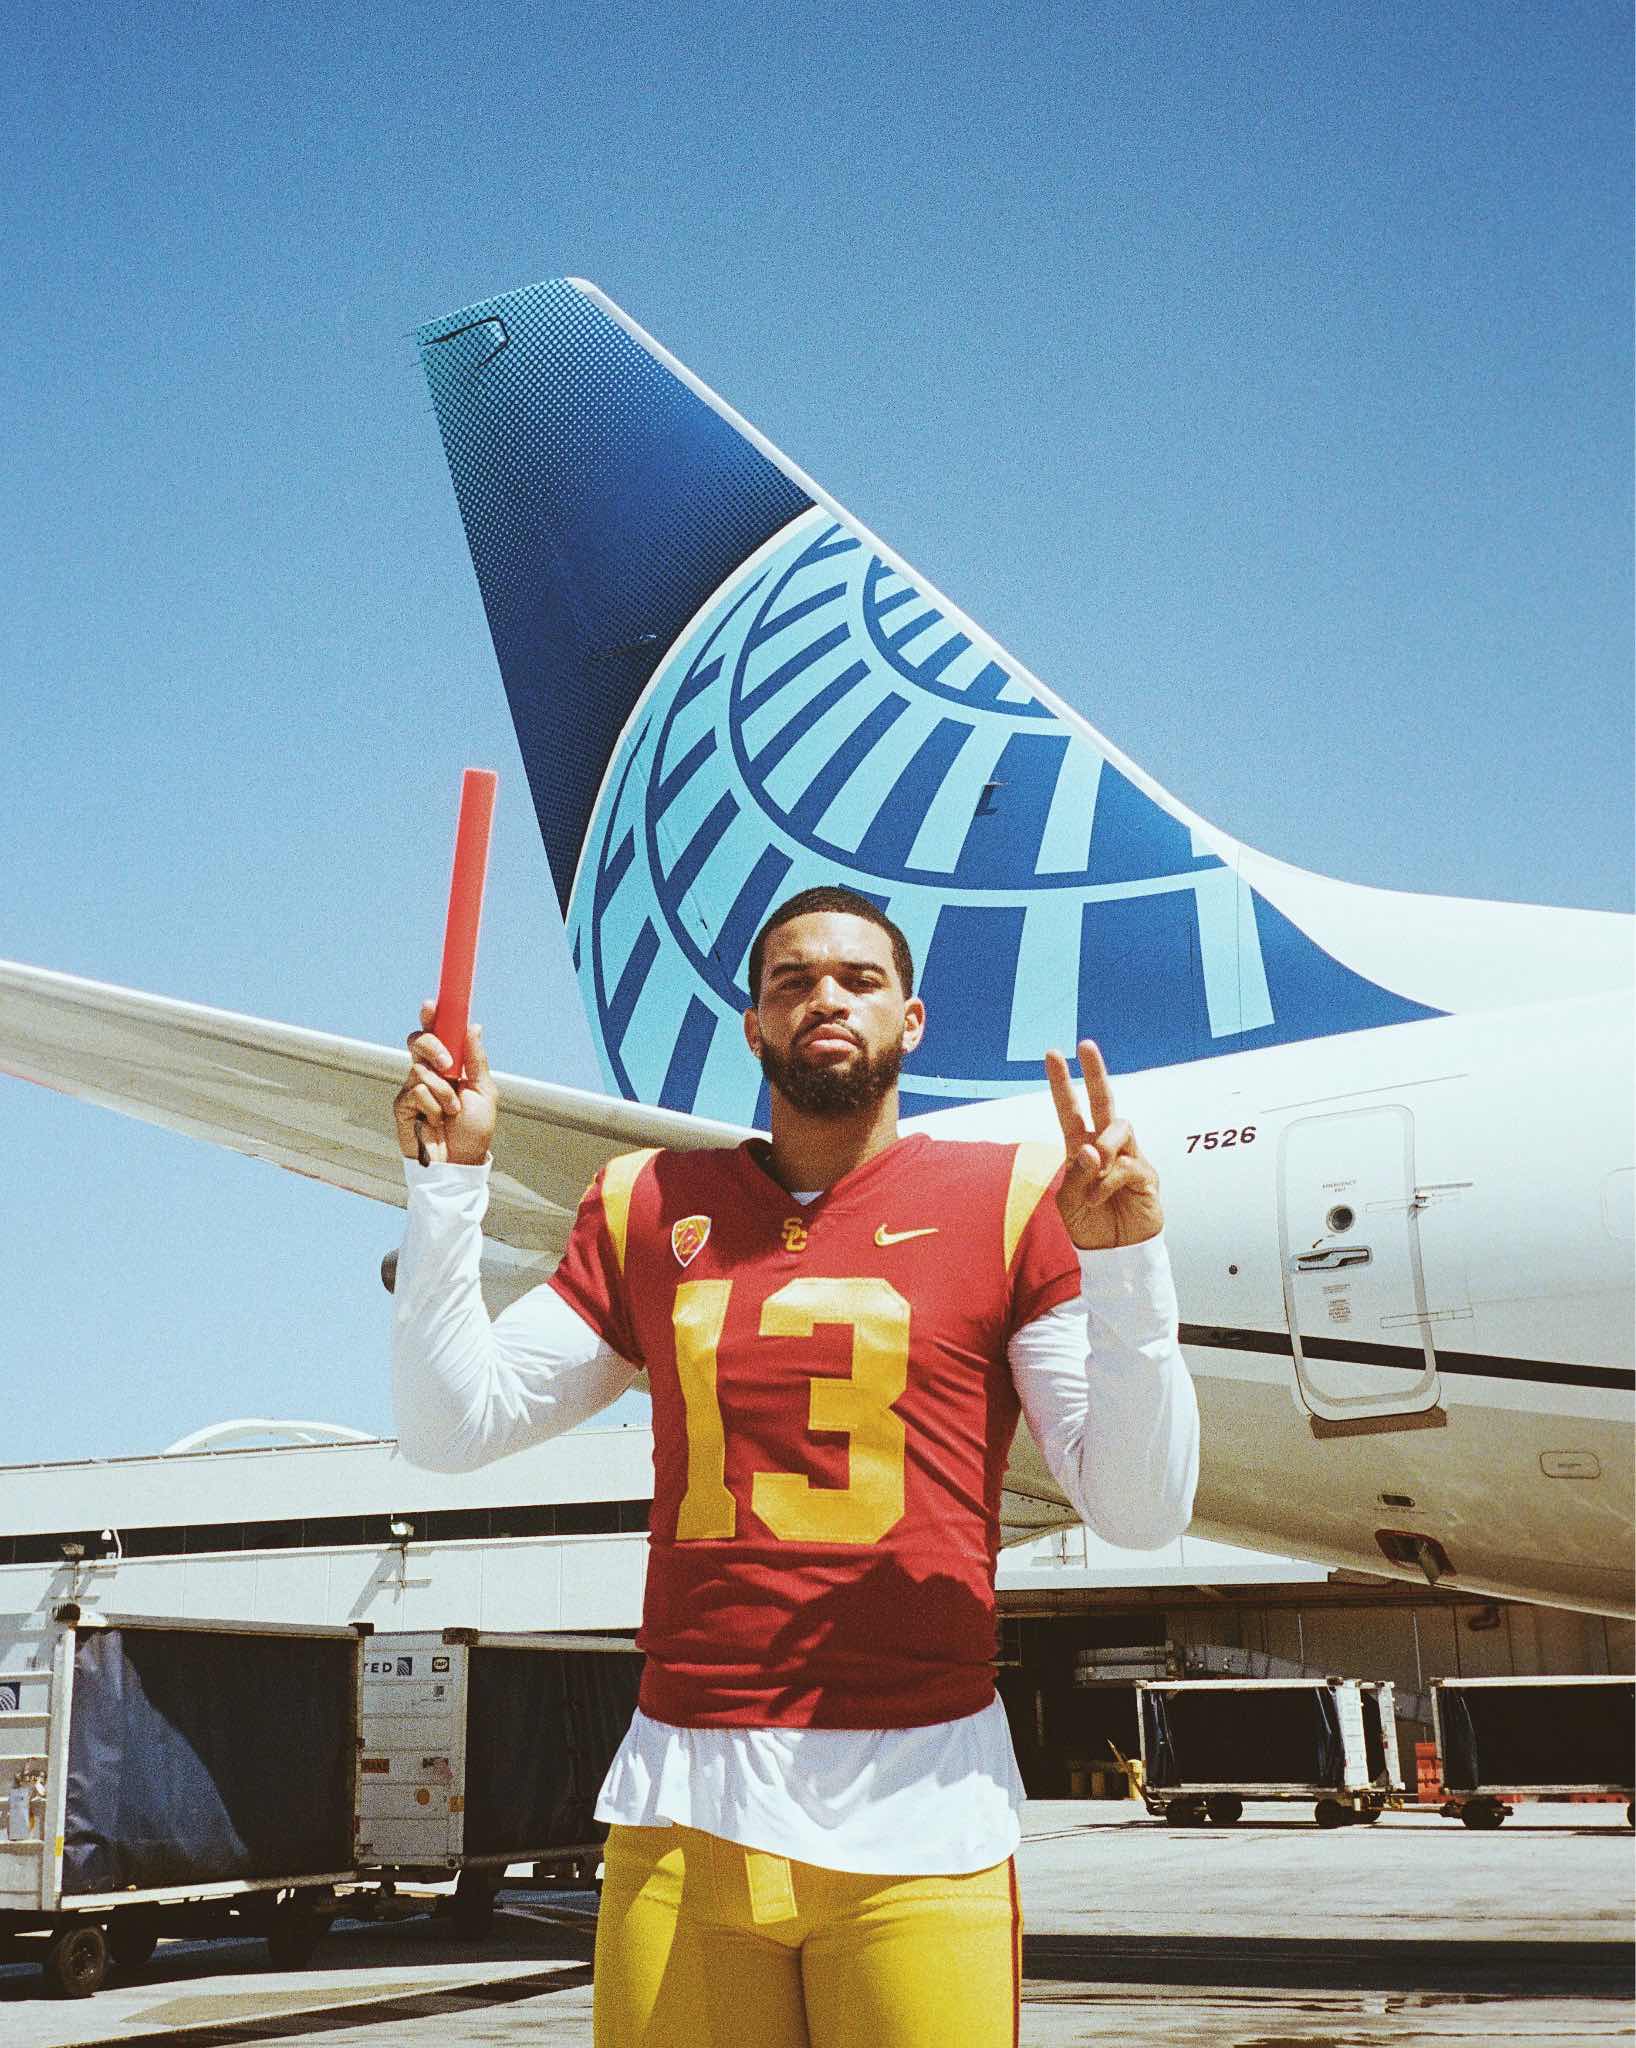 a man holding a red object in front of a plane